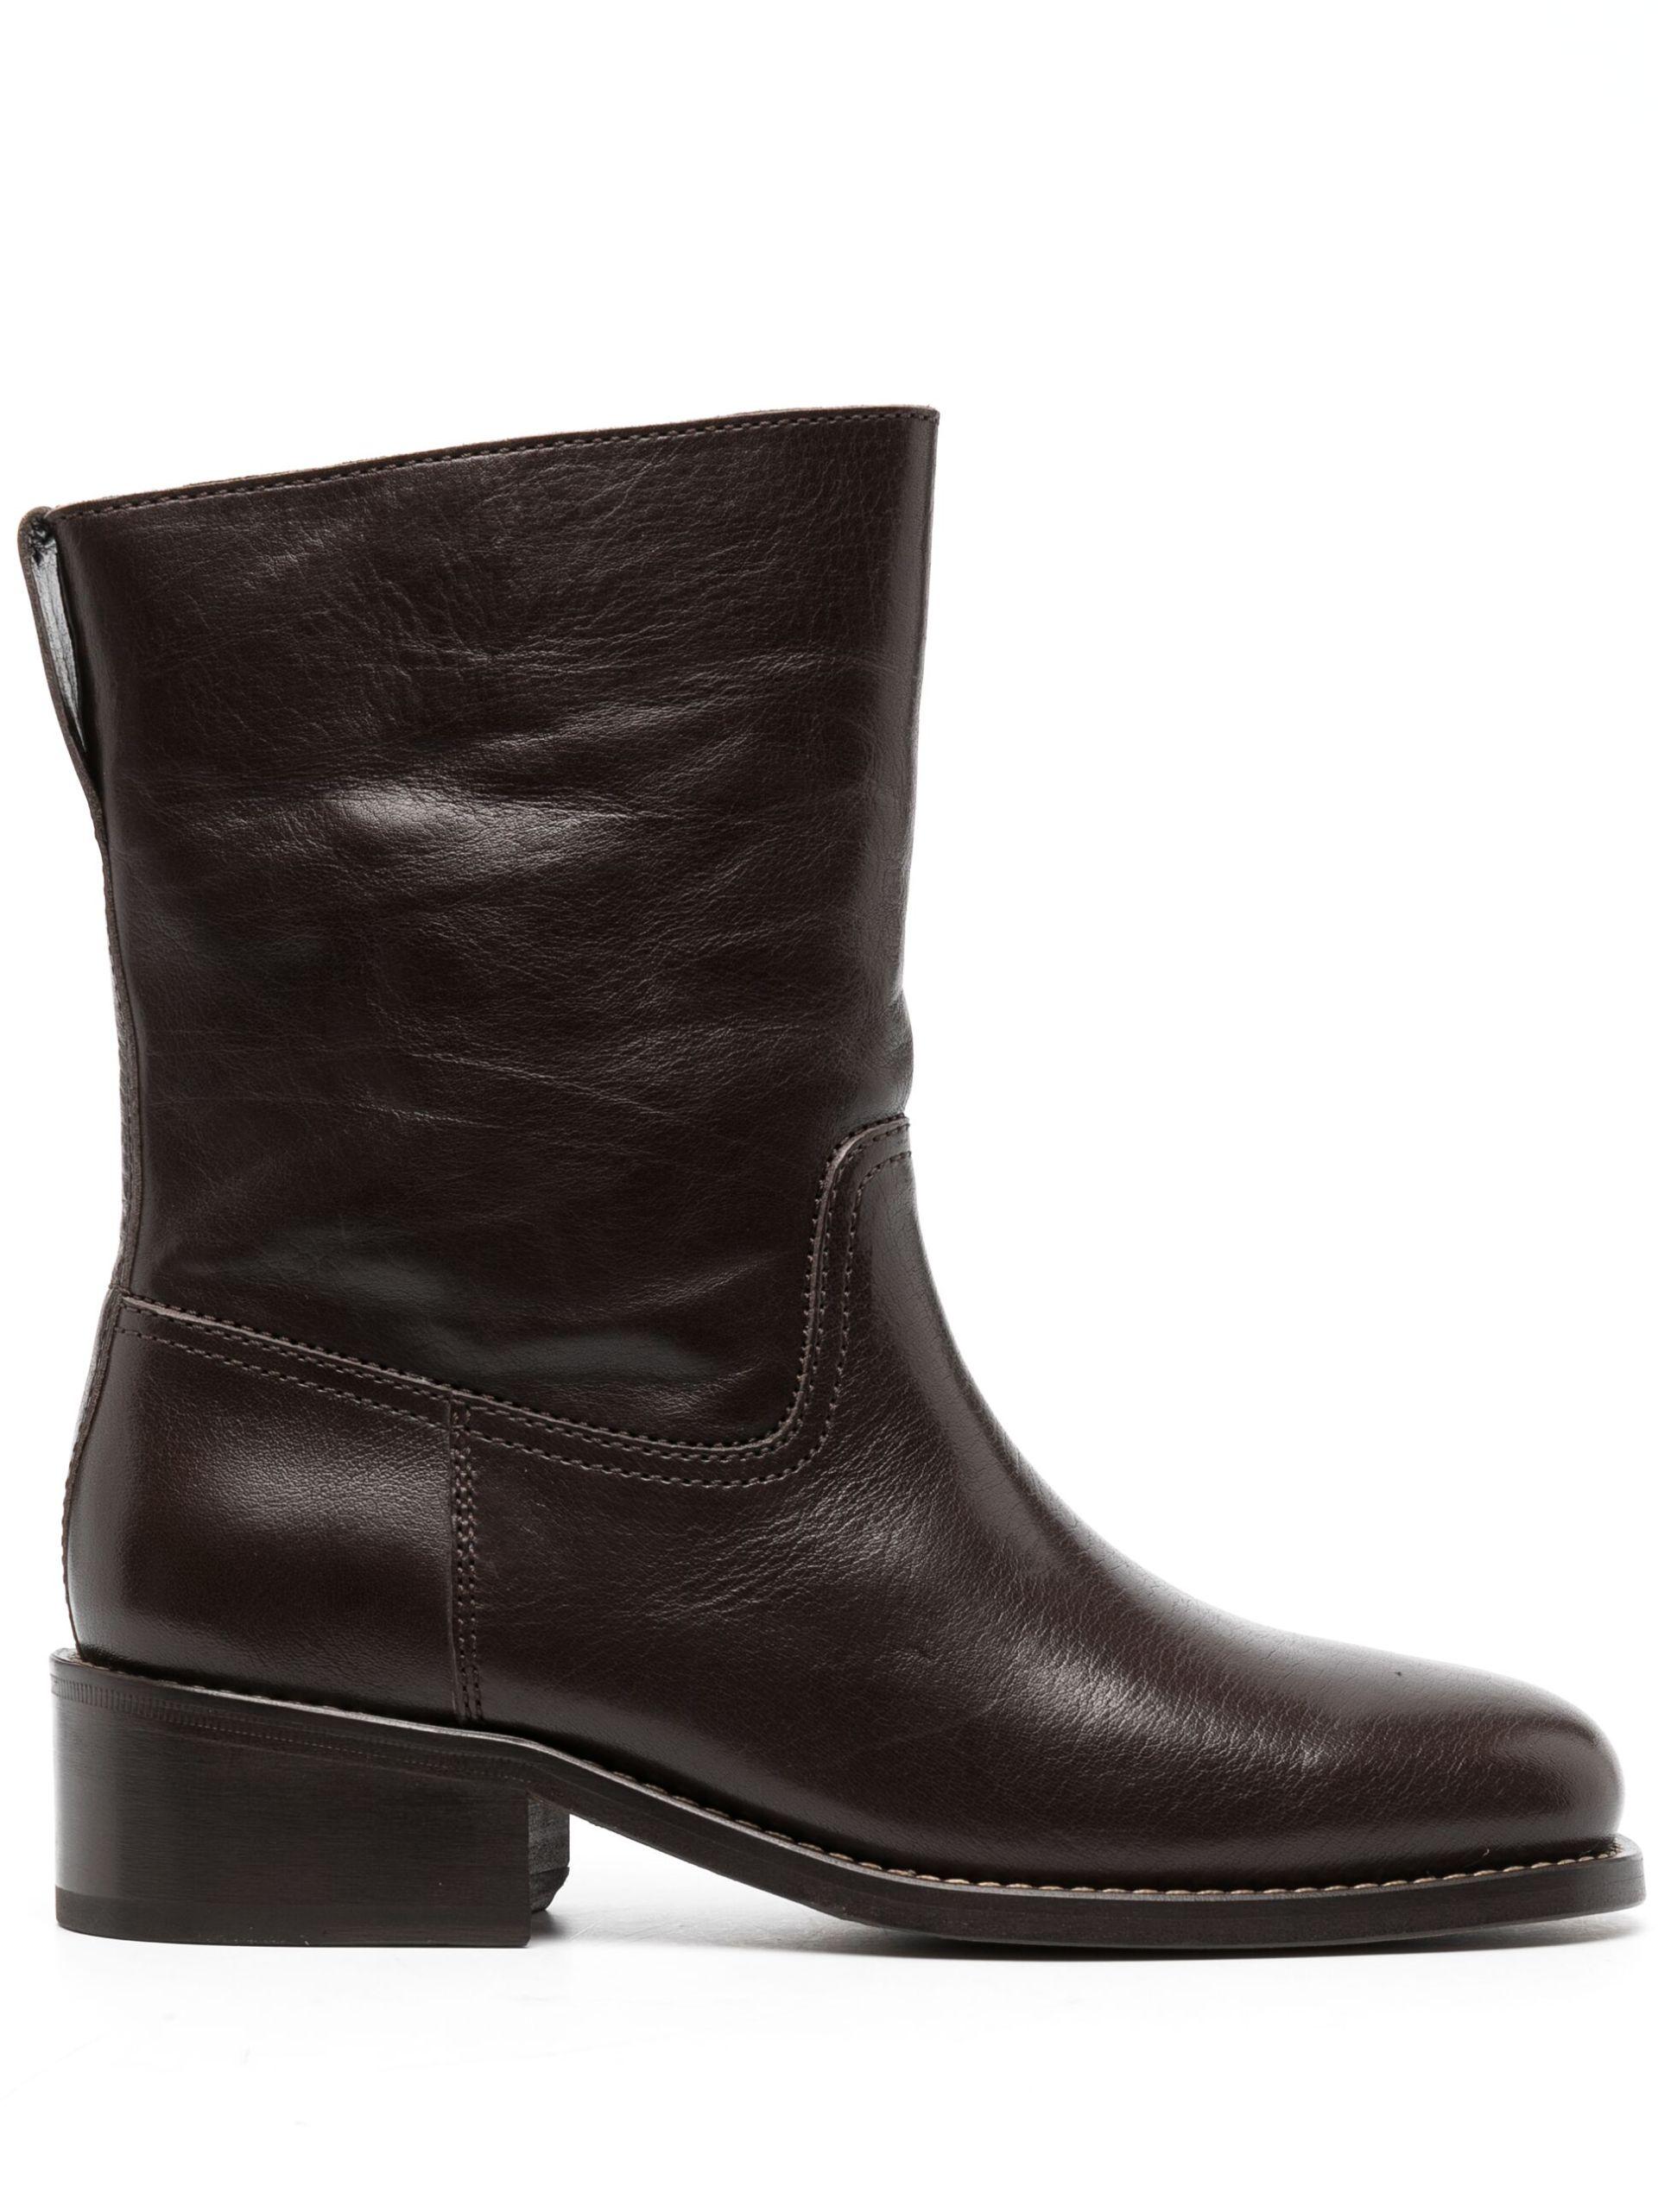 Lemaire Ankle-length Leather Boots in Brown | Lyst